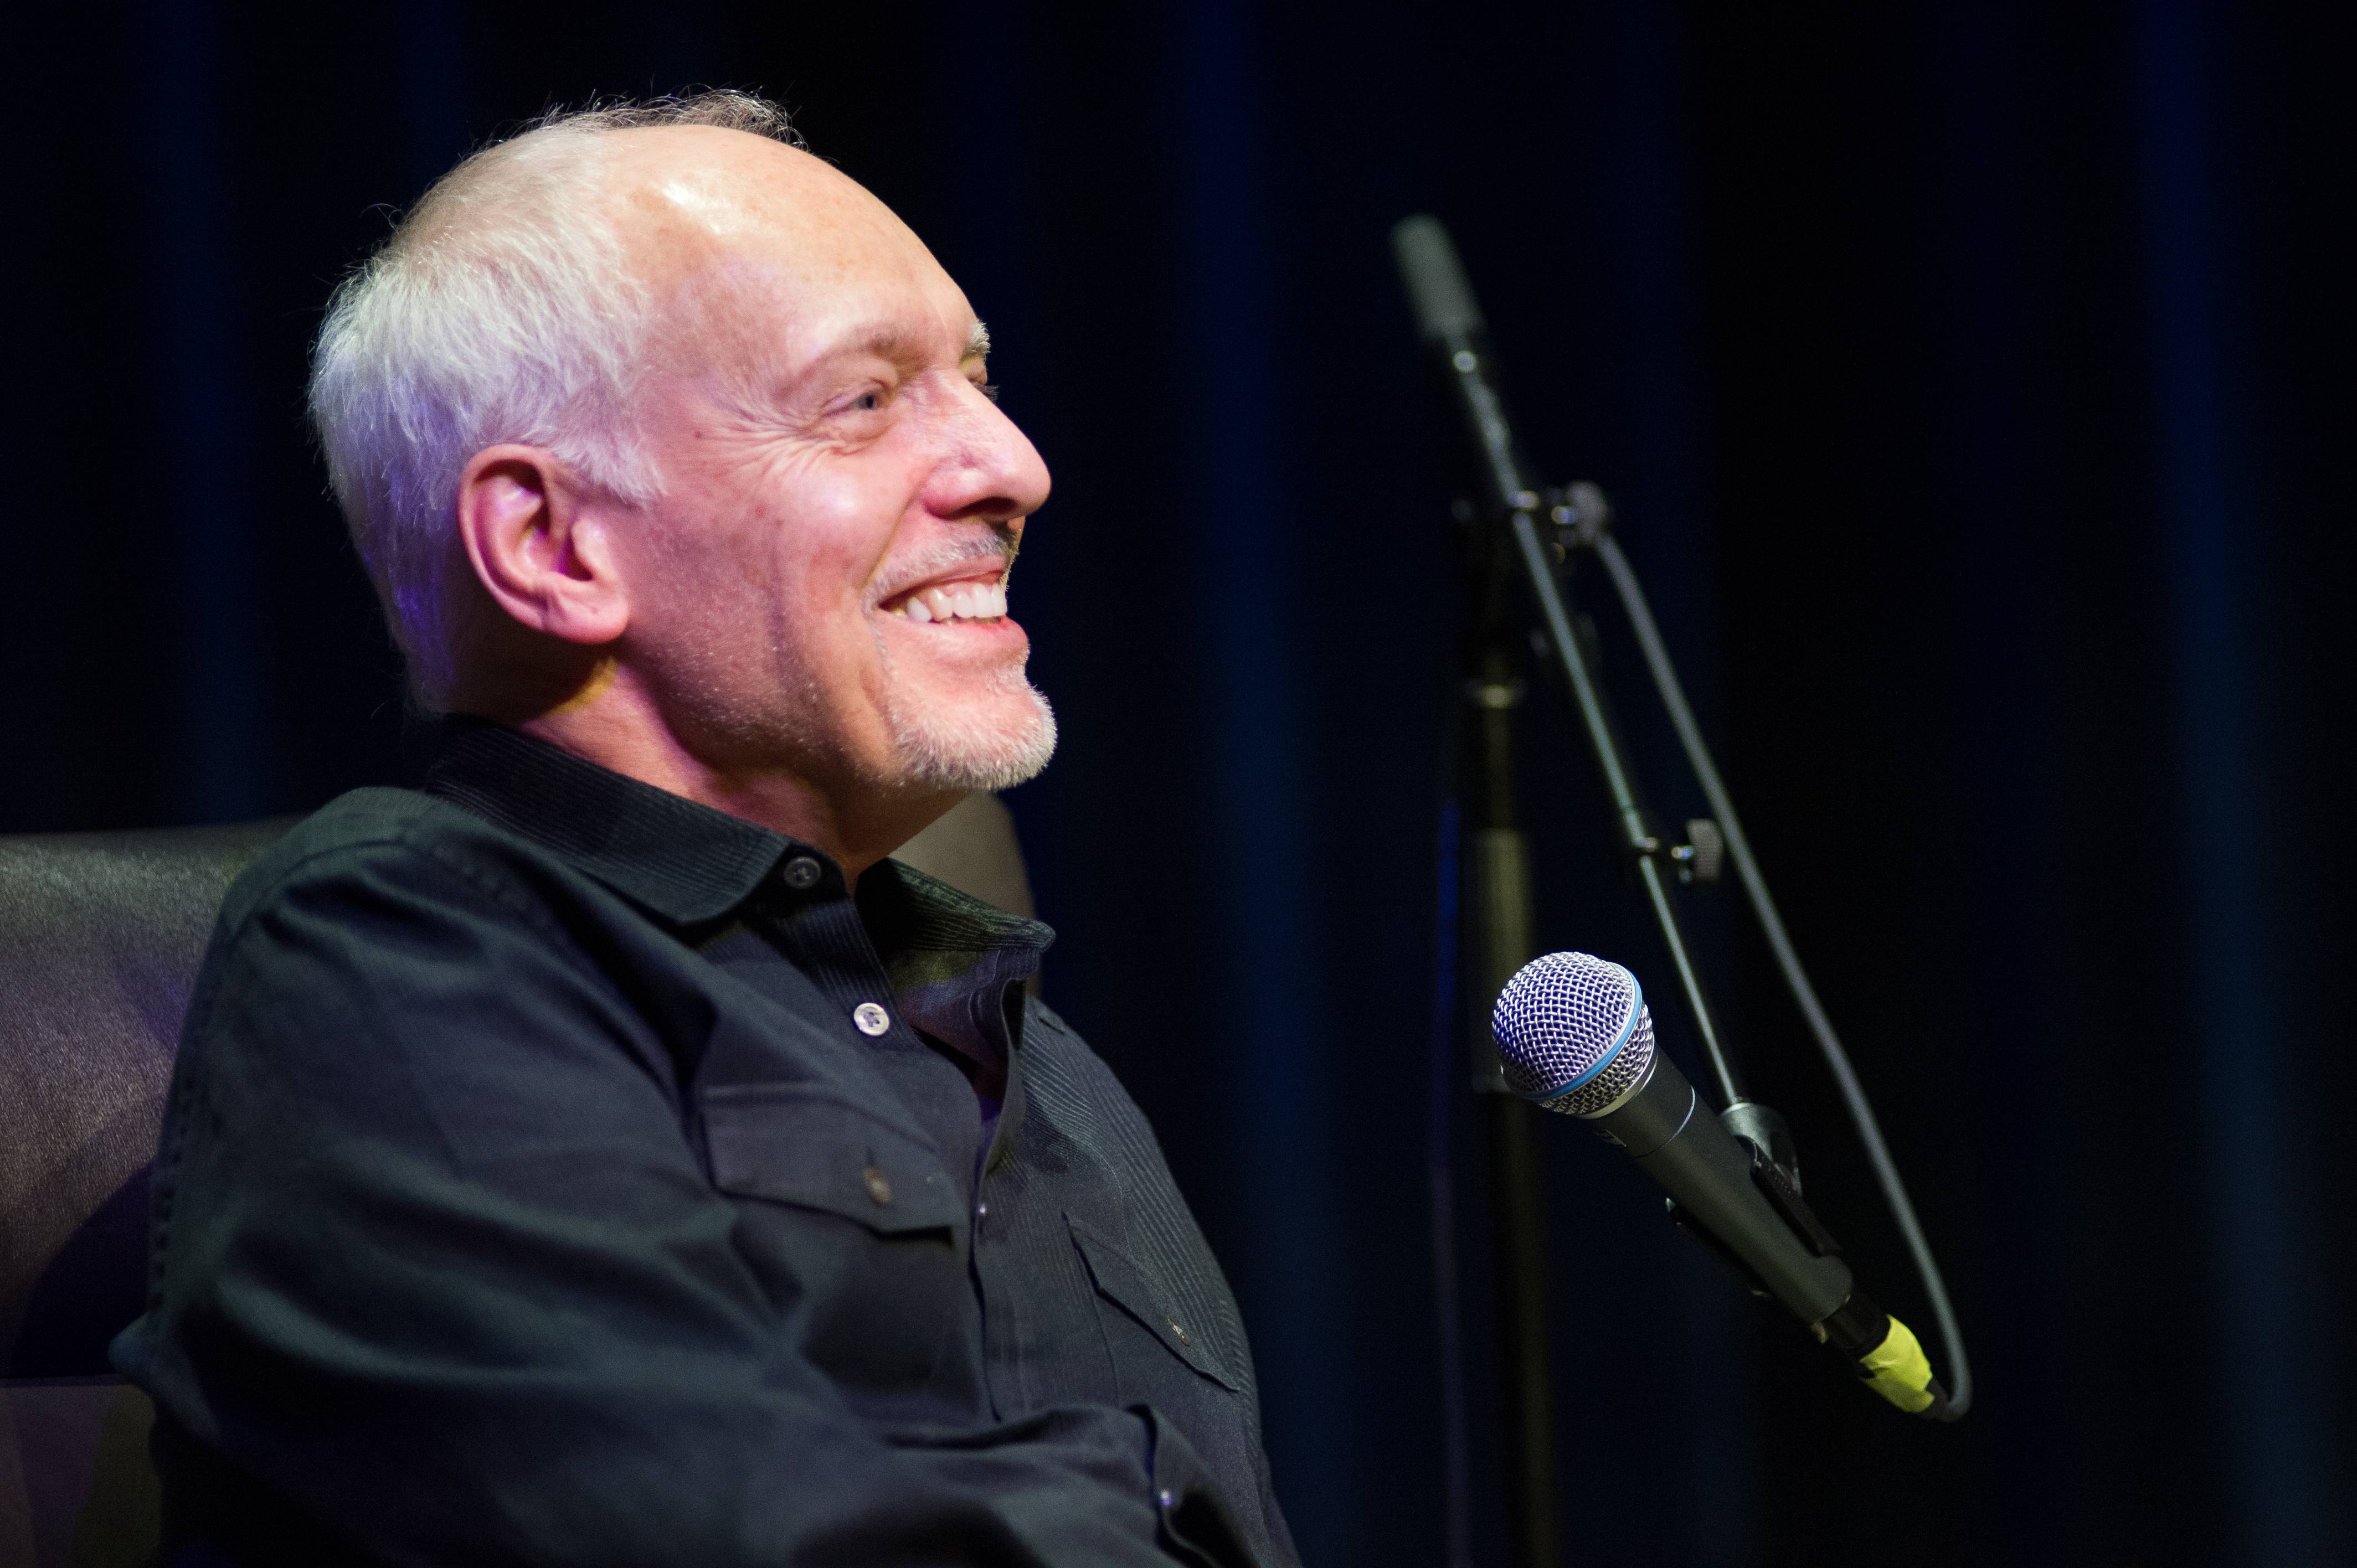 Peter Frampton answers questions from the audience at GRAMMY Museum Mississippi on Nov. 3, 2017, in Cleveland, Mississippi.